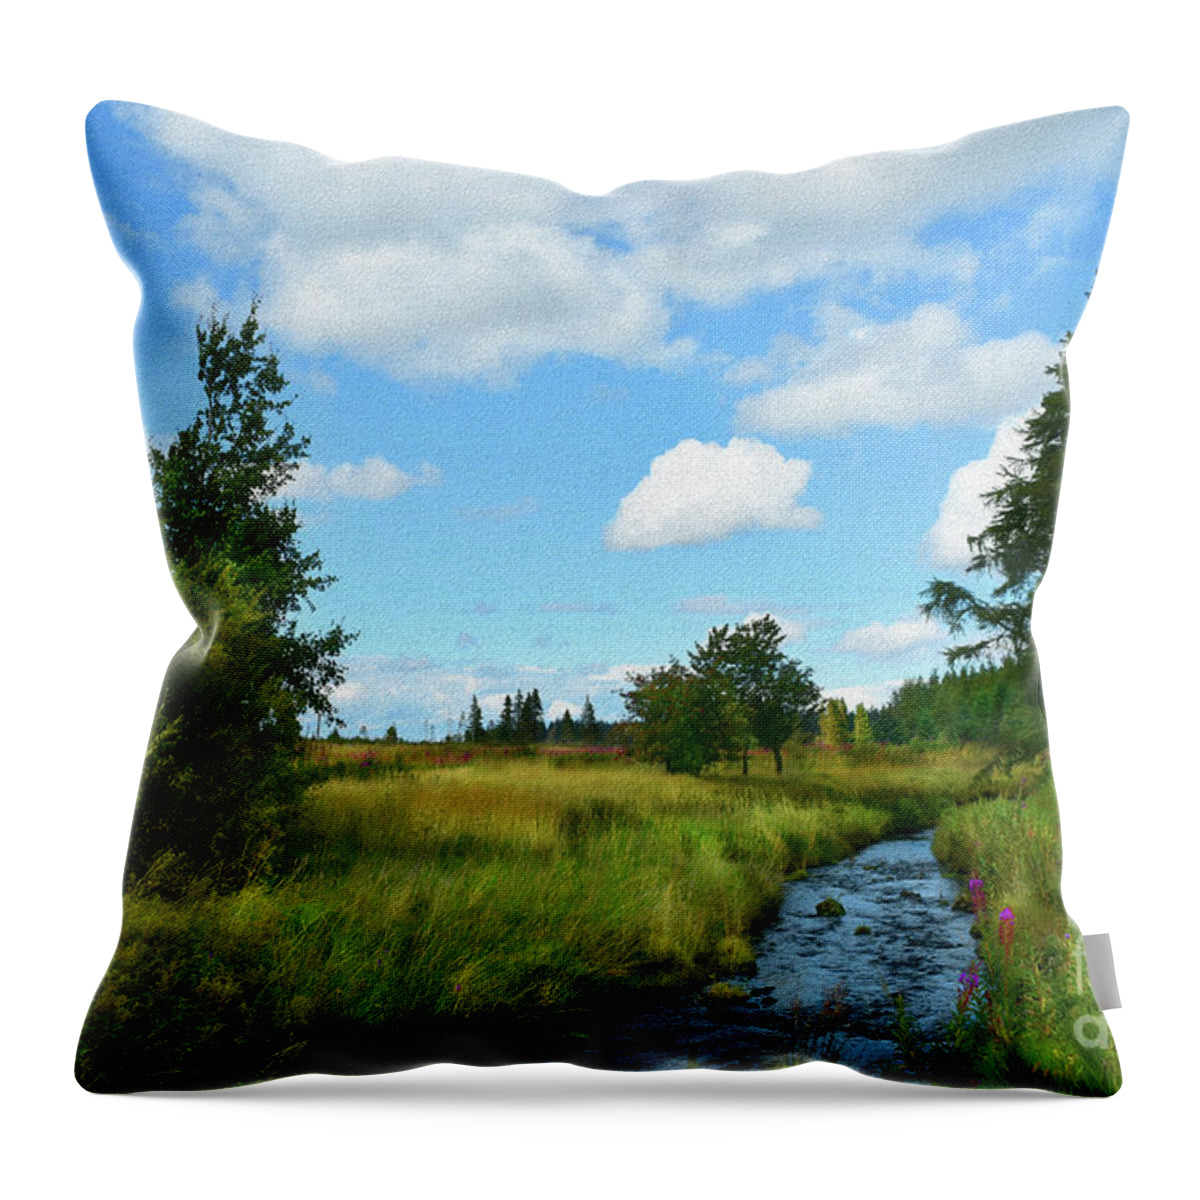 Landscape Throw Pillow featuring the photograph Camilty Forest by Yvonne Johnstone